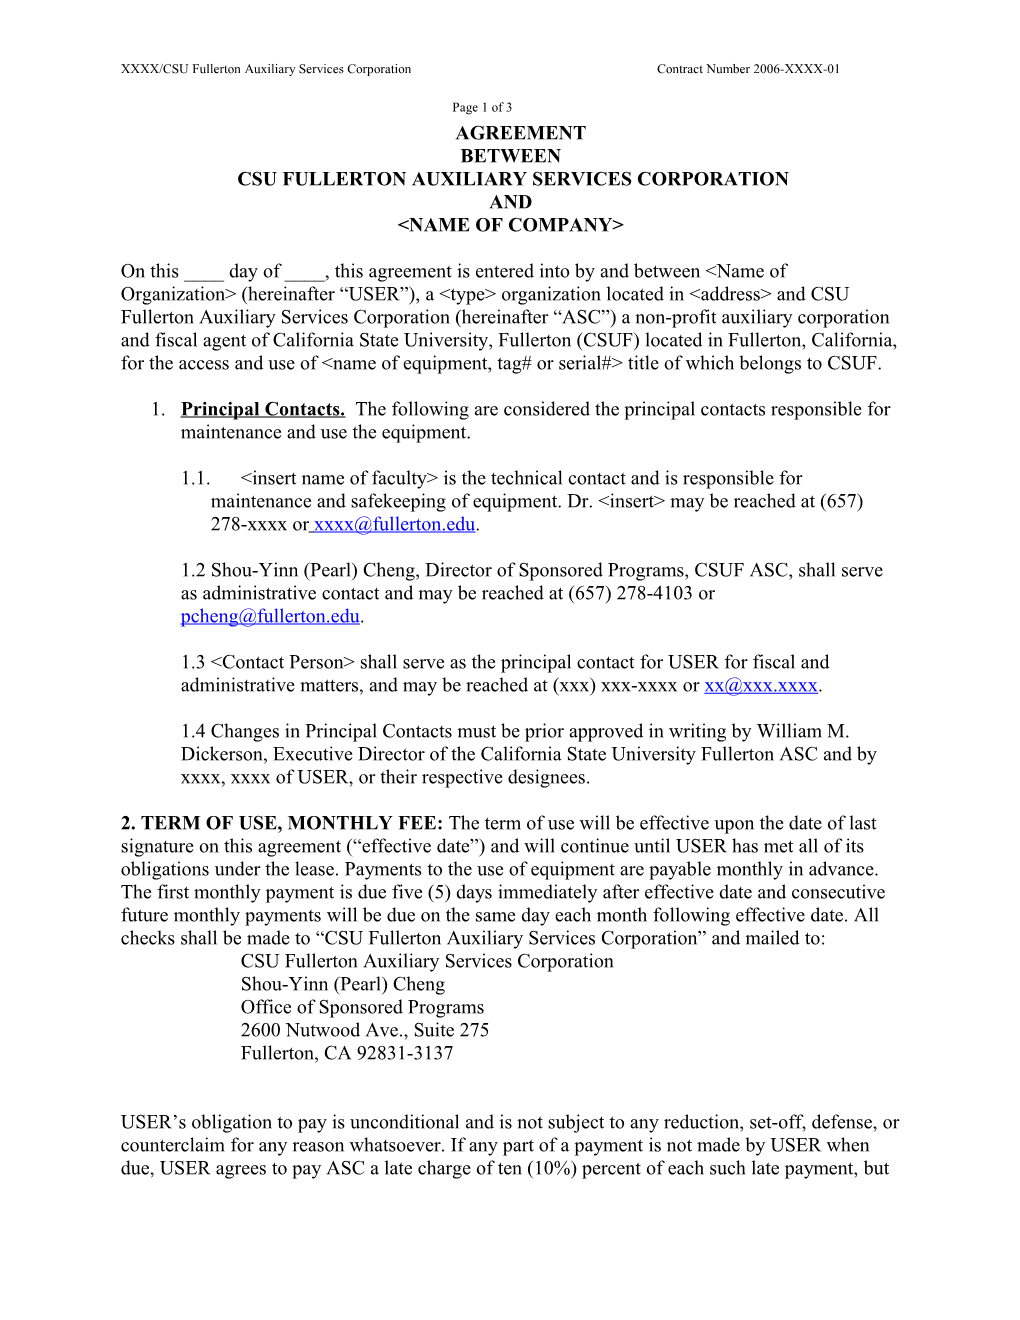 XXXX/CSU Fullerton Auxiliary Services Corporation Contract Number 2006-XXXX-01 Page 3 of 4